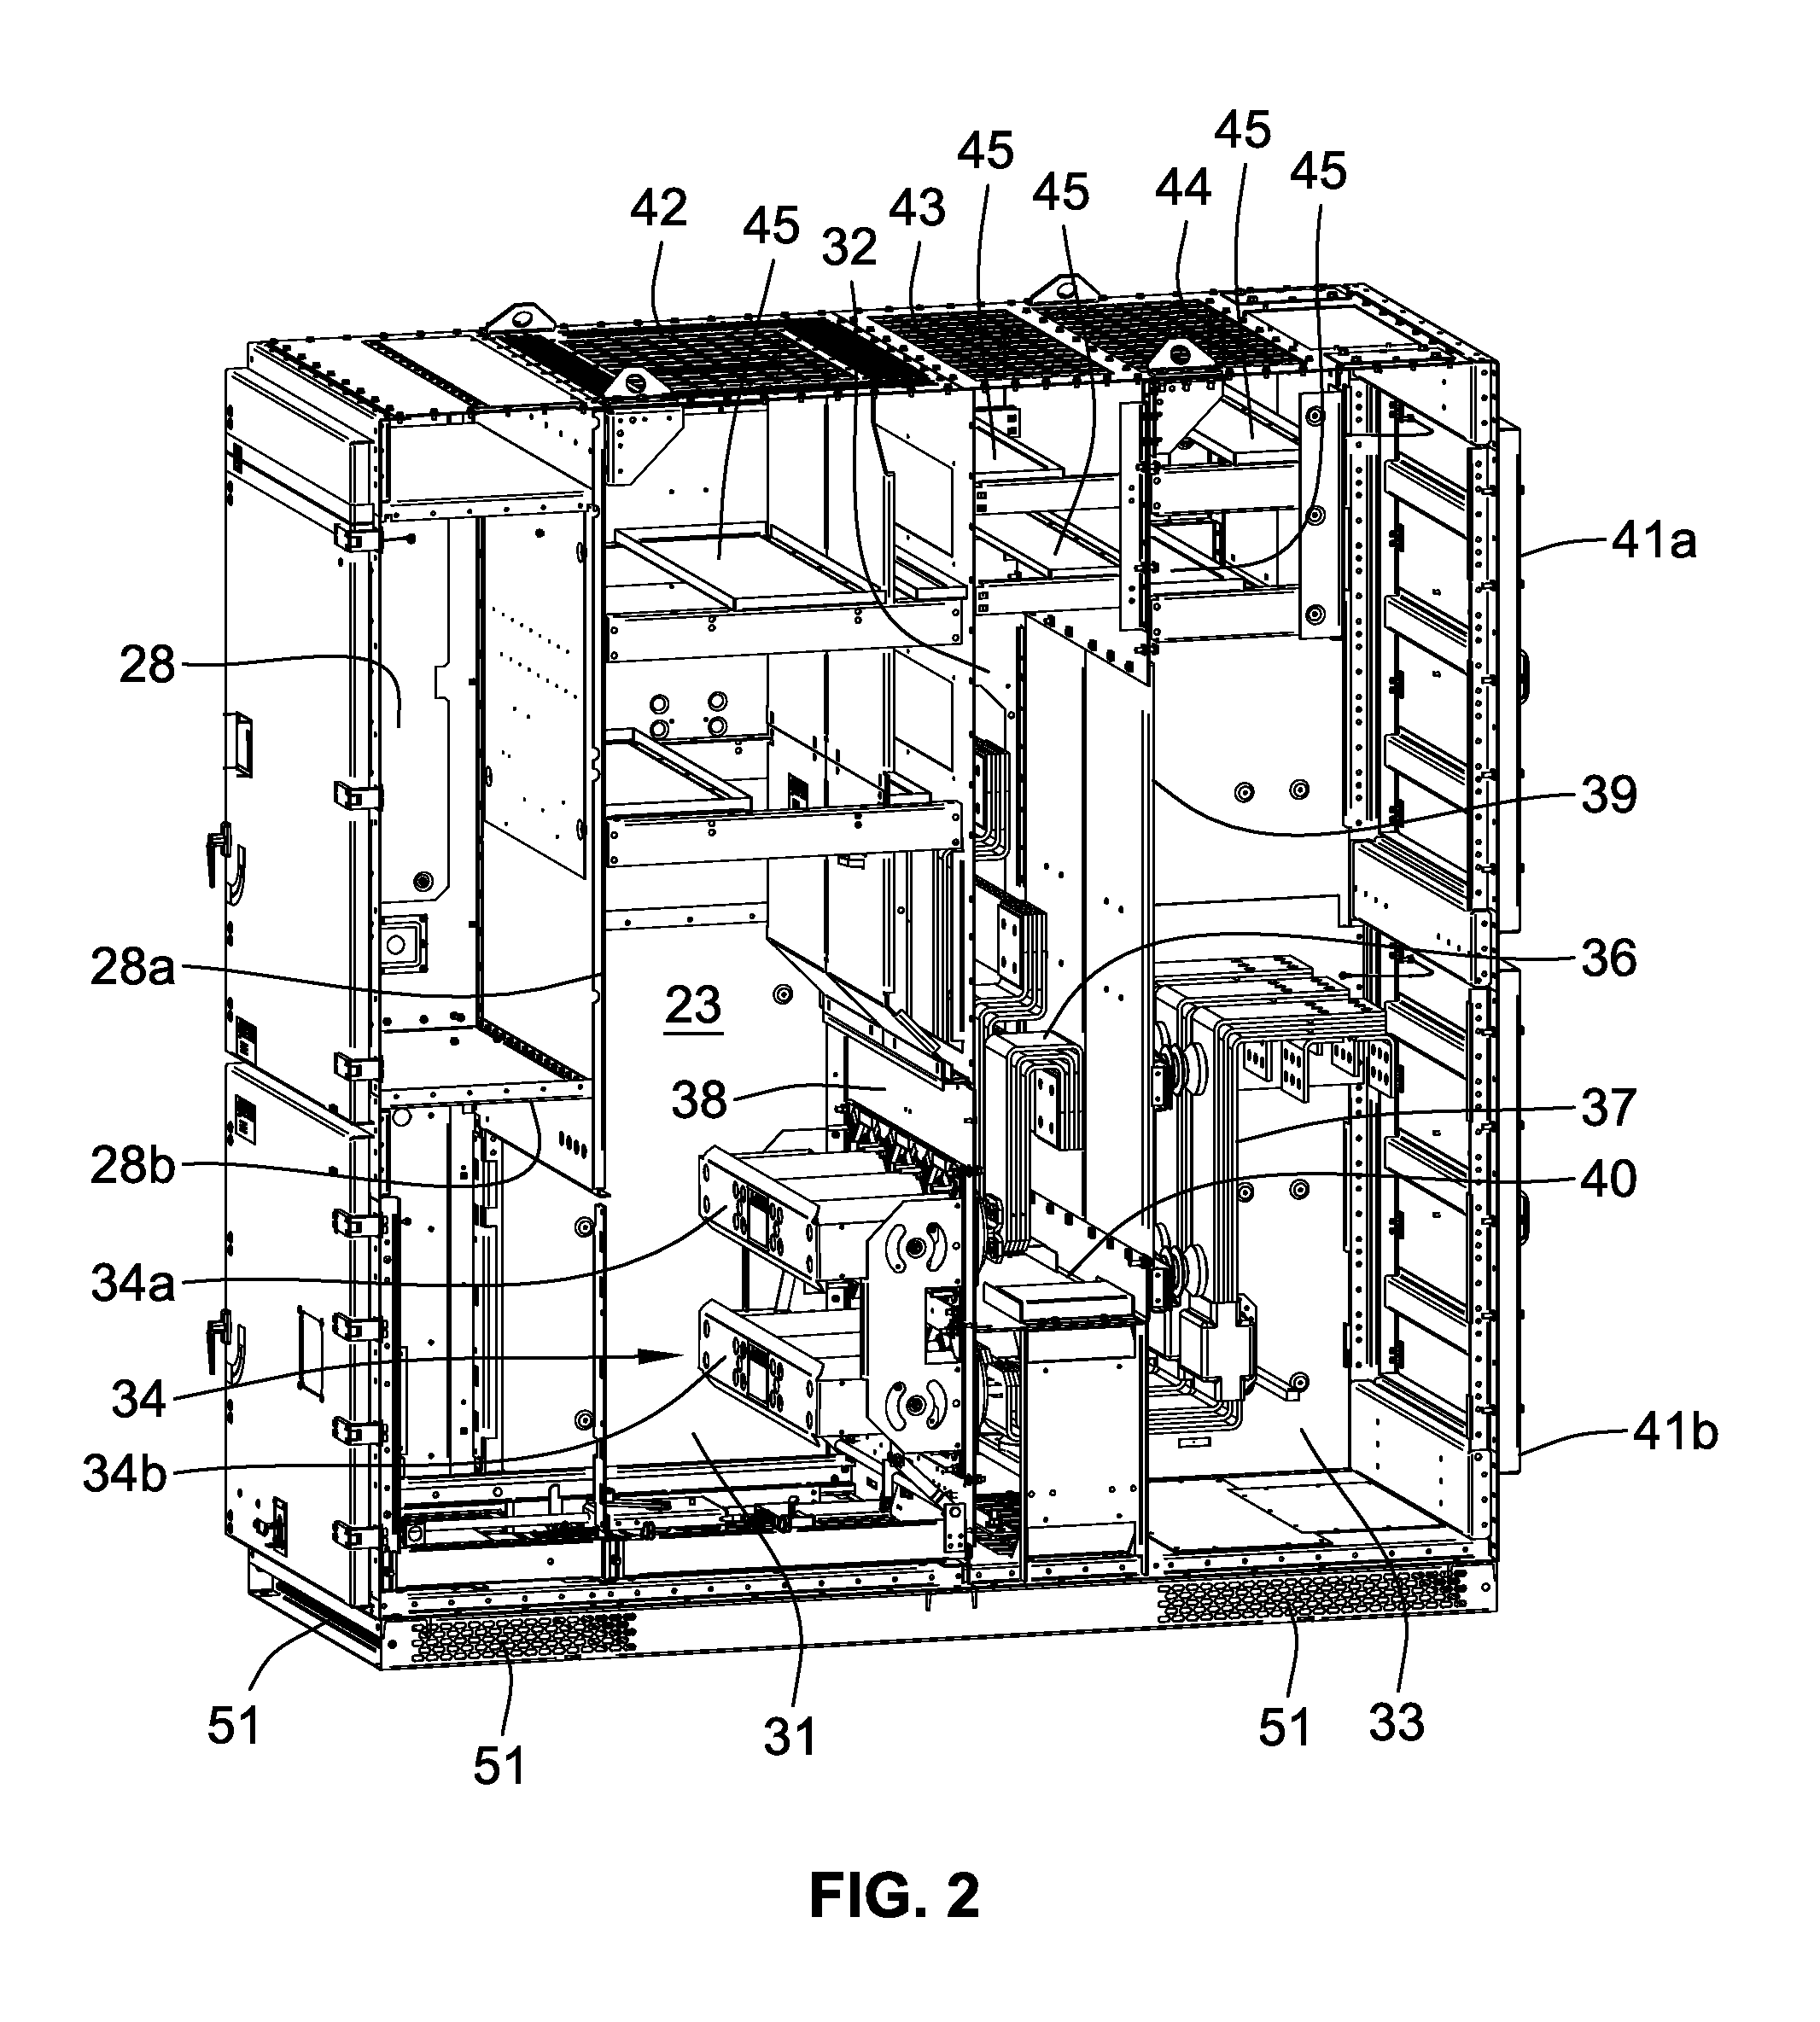 Arc-resistant switchgear enclosure with ambient air ventilation system